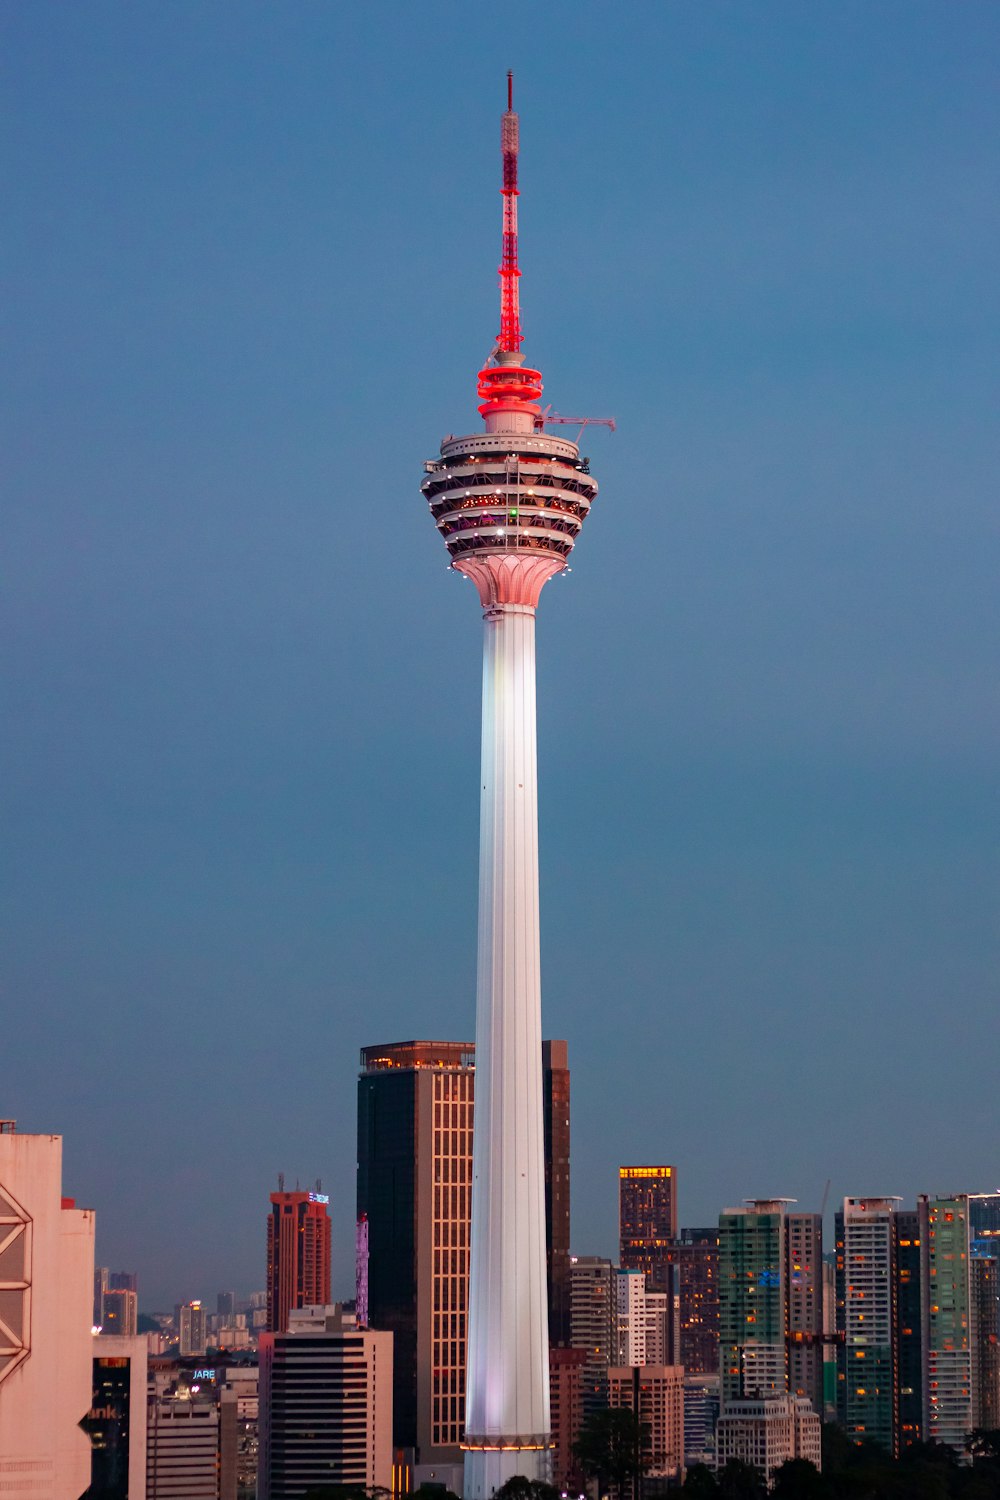 a tall tower with a red top in the middle of a city